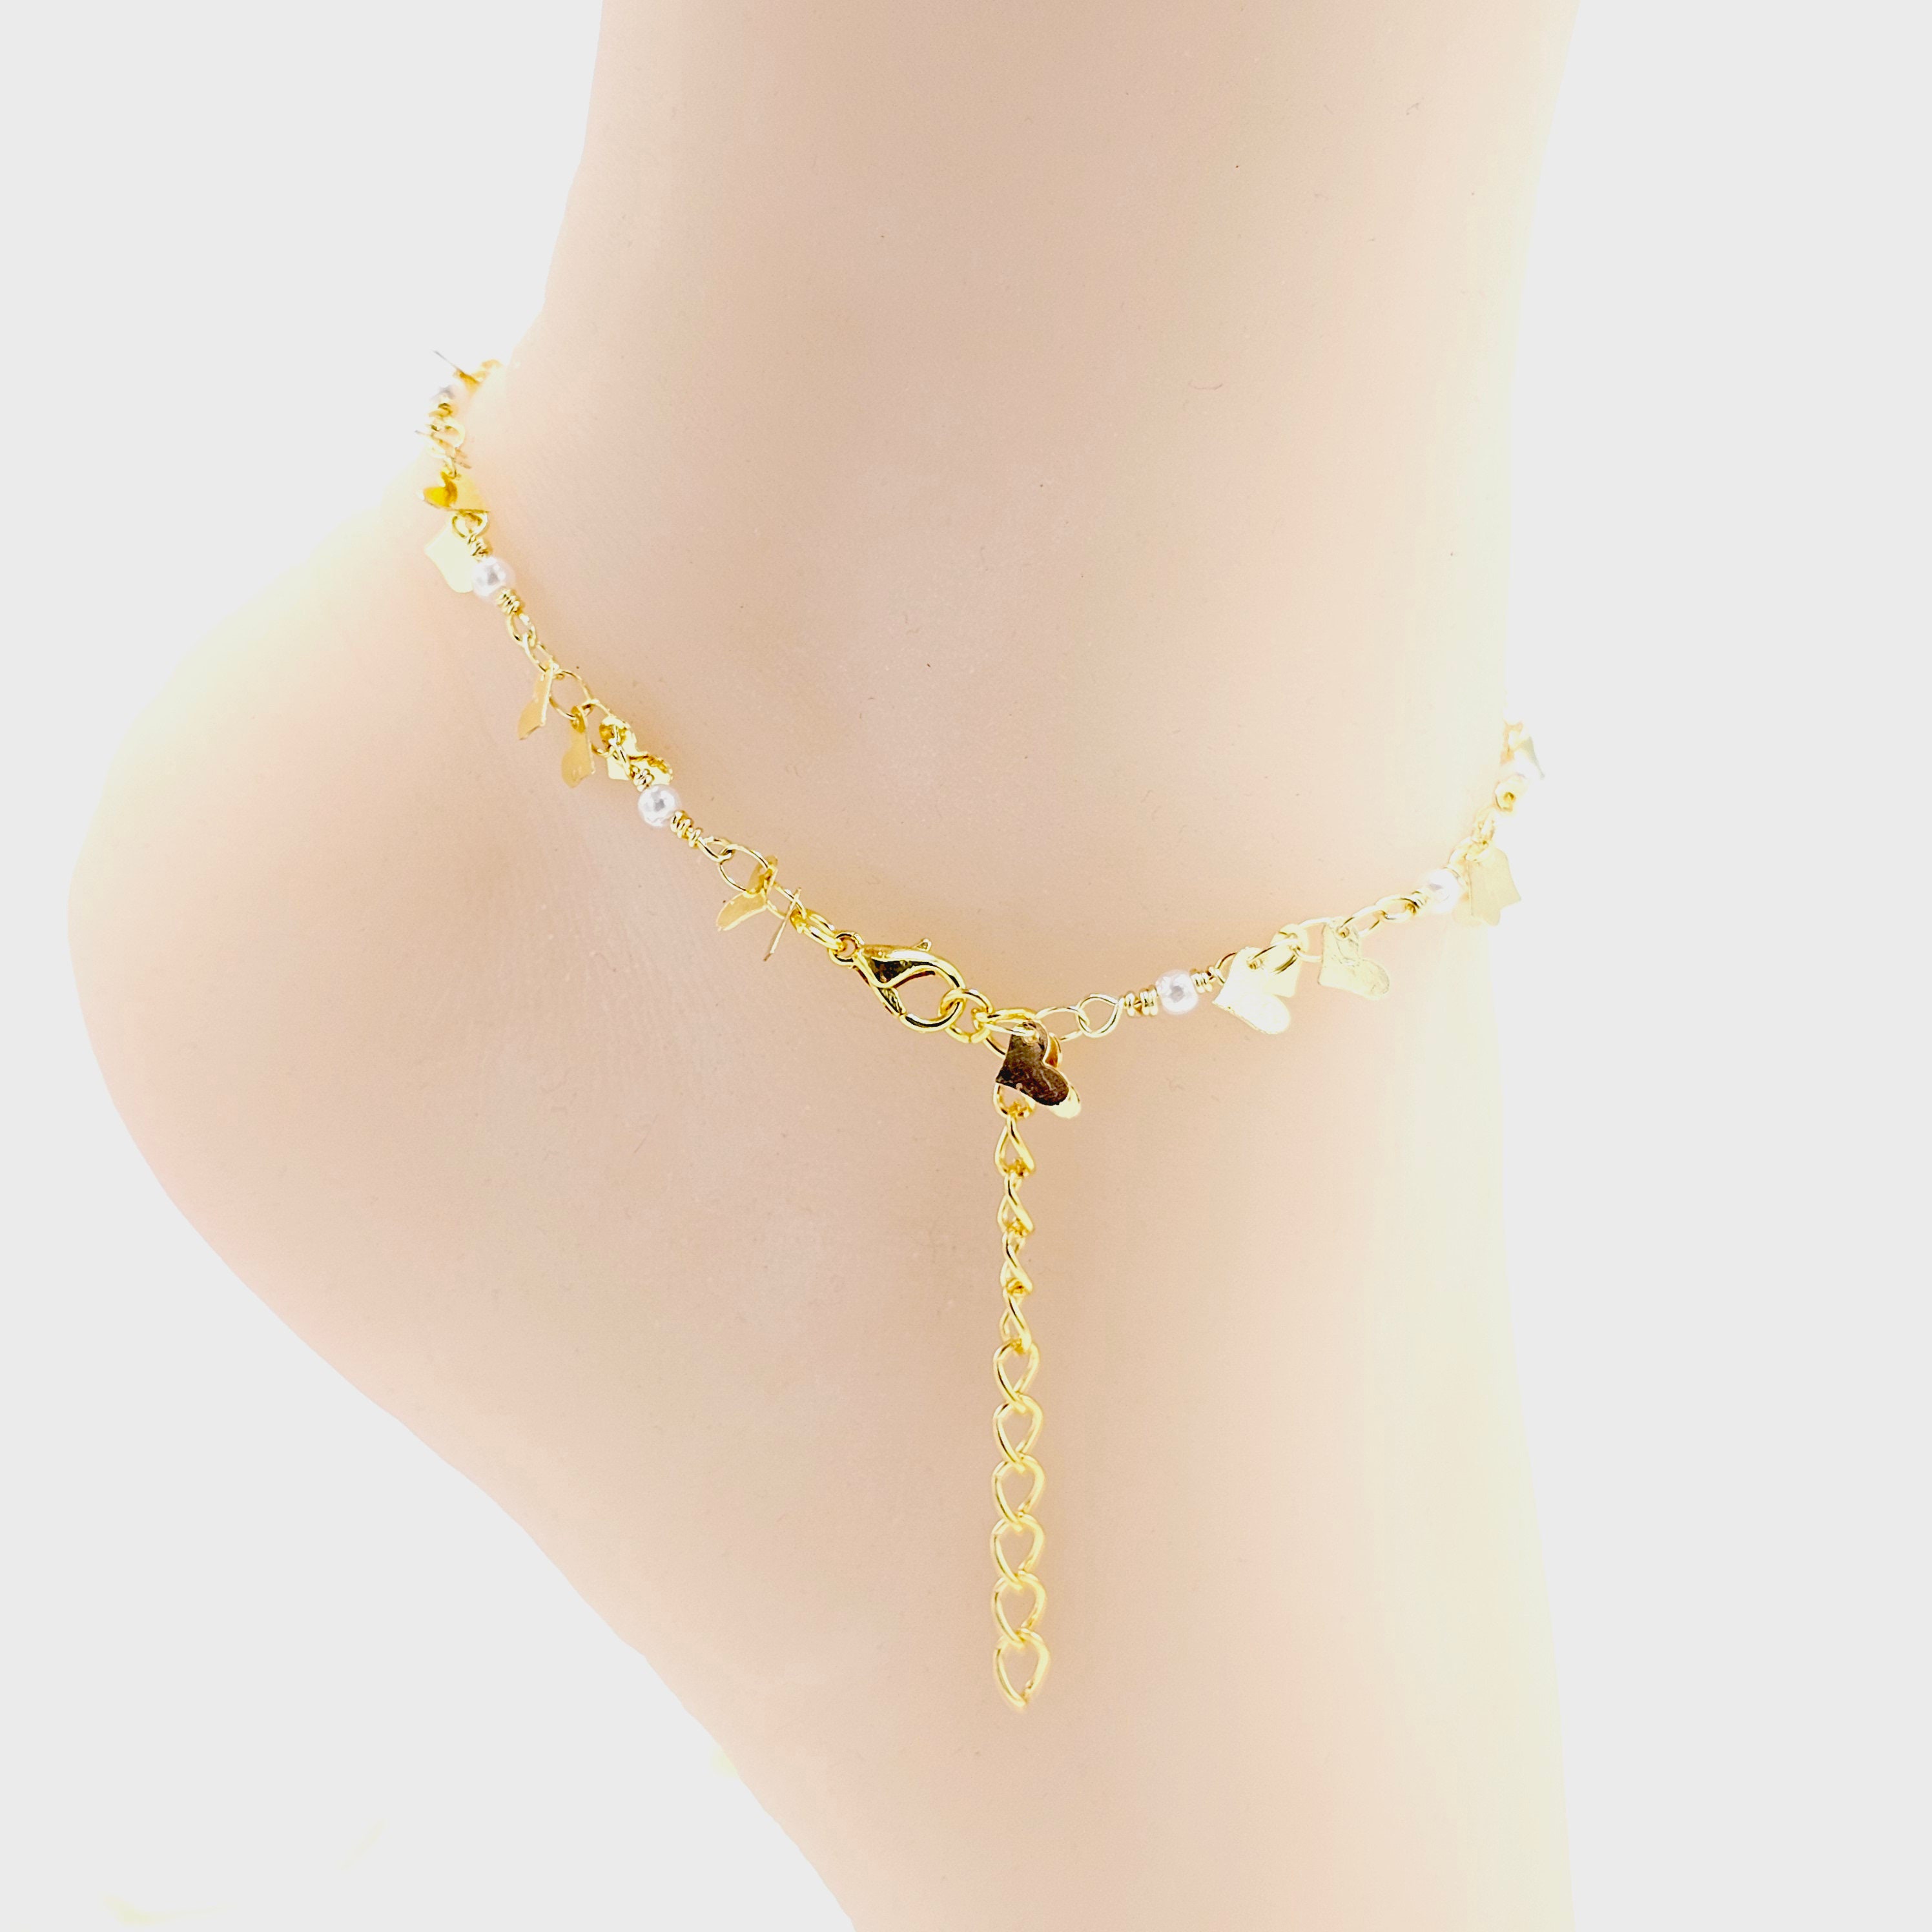 Gold Hotwife Anklet with Pearls and Hearts. Discreet HW for Hot Wife. Swinger Lifestyle photo